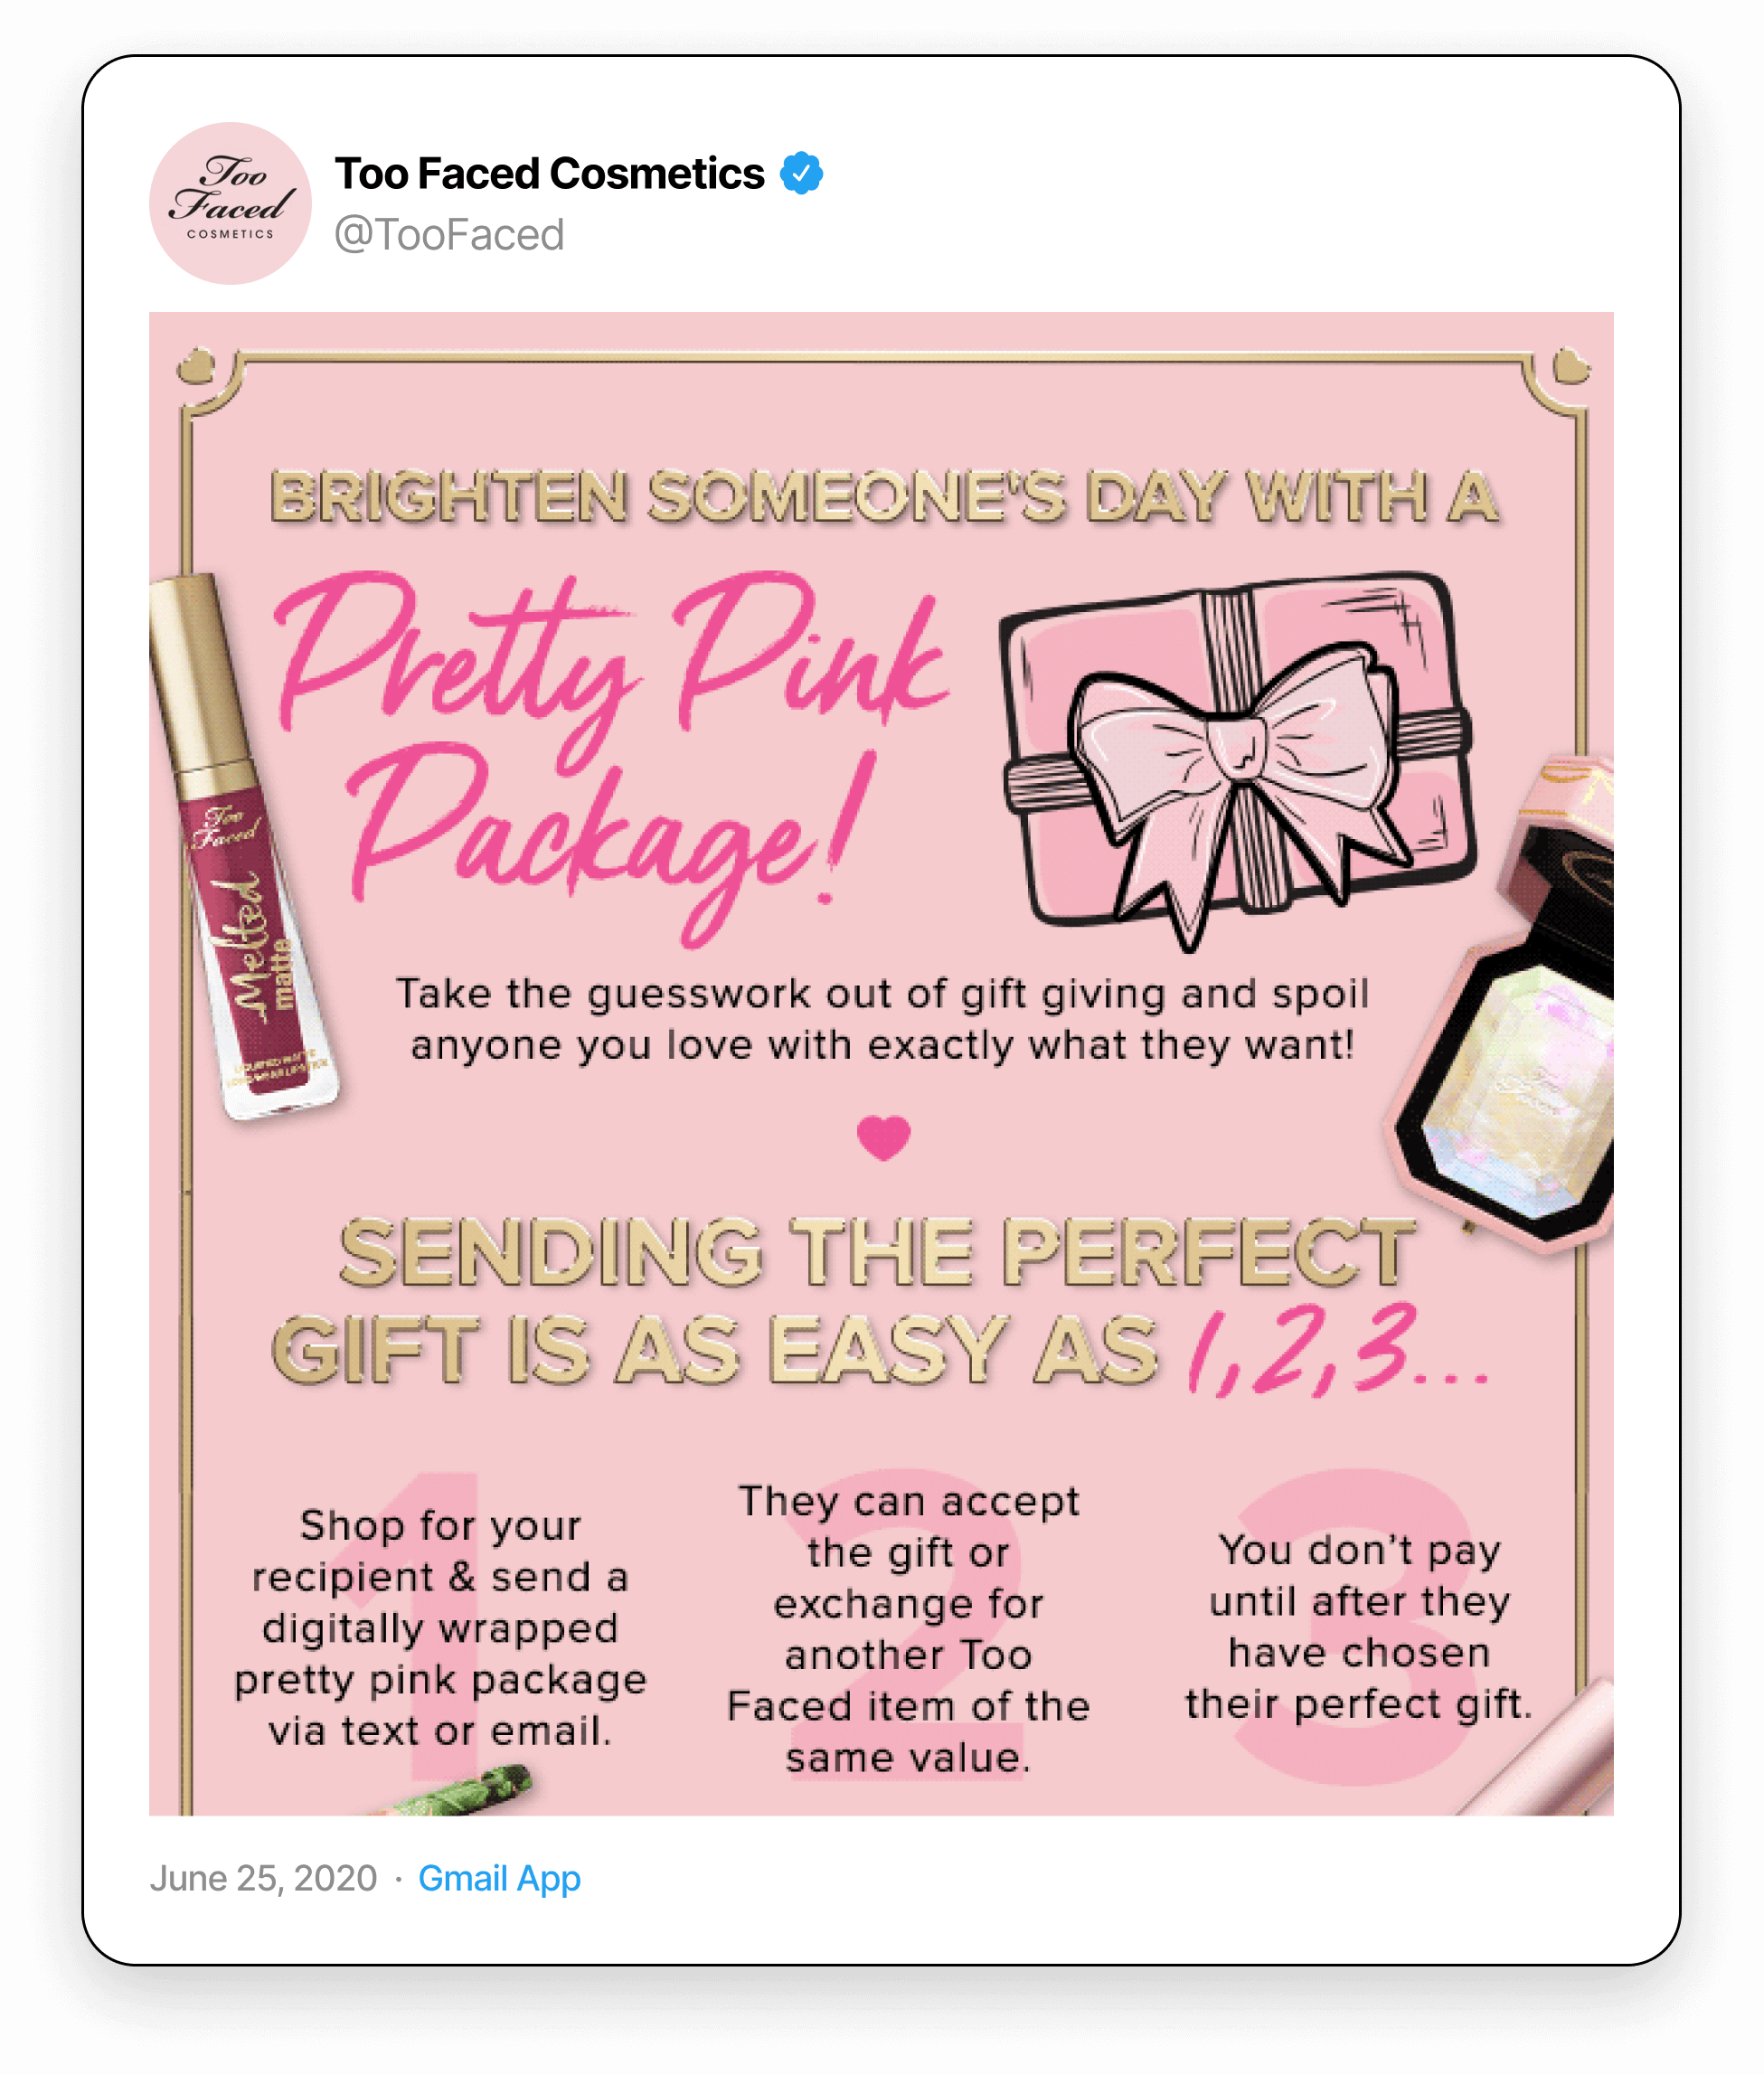 Too Faced Promotion